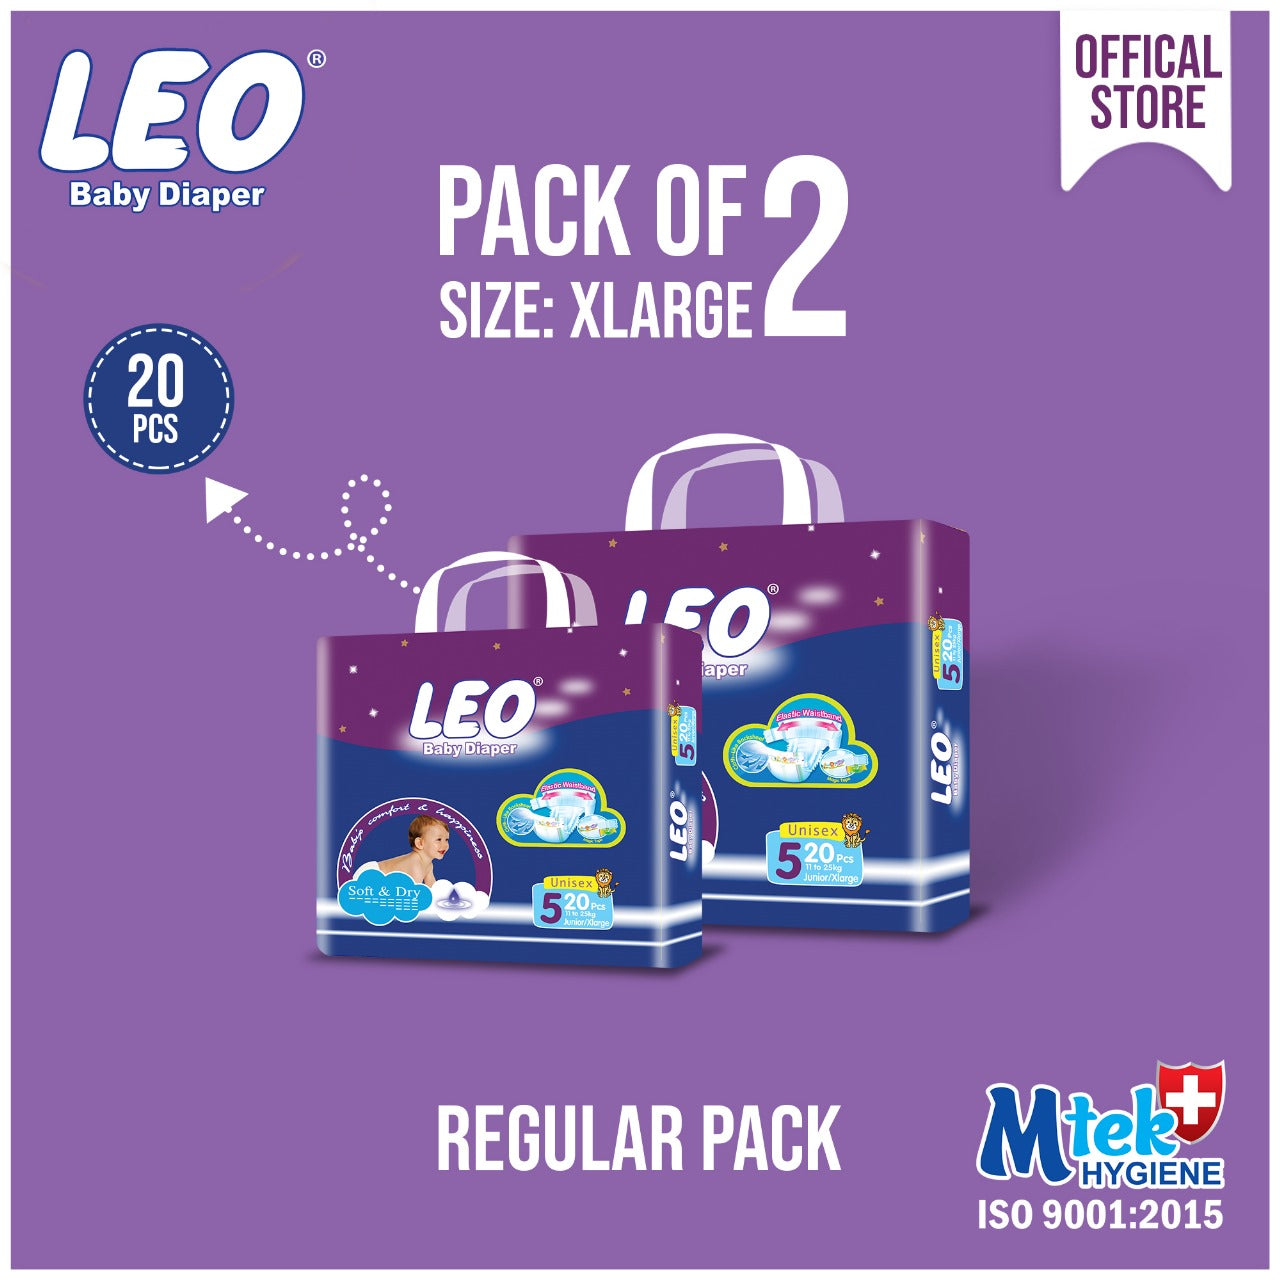 Leo Regular Pack Baby Diaper – Size 5, X-Large – 20 Pcs (Pack of 2)